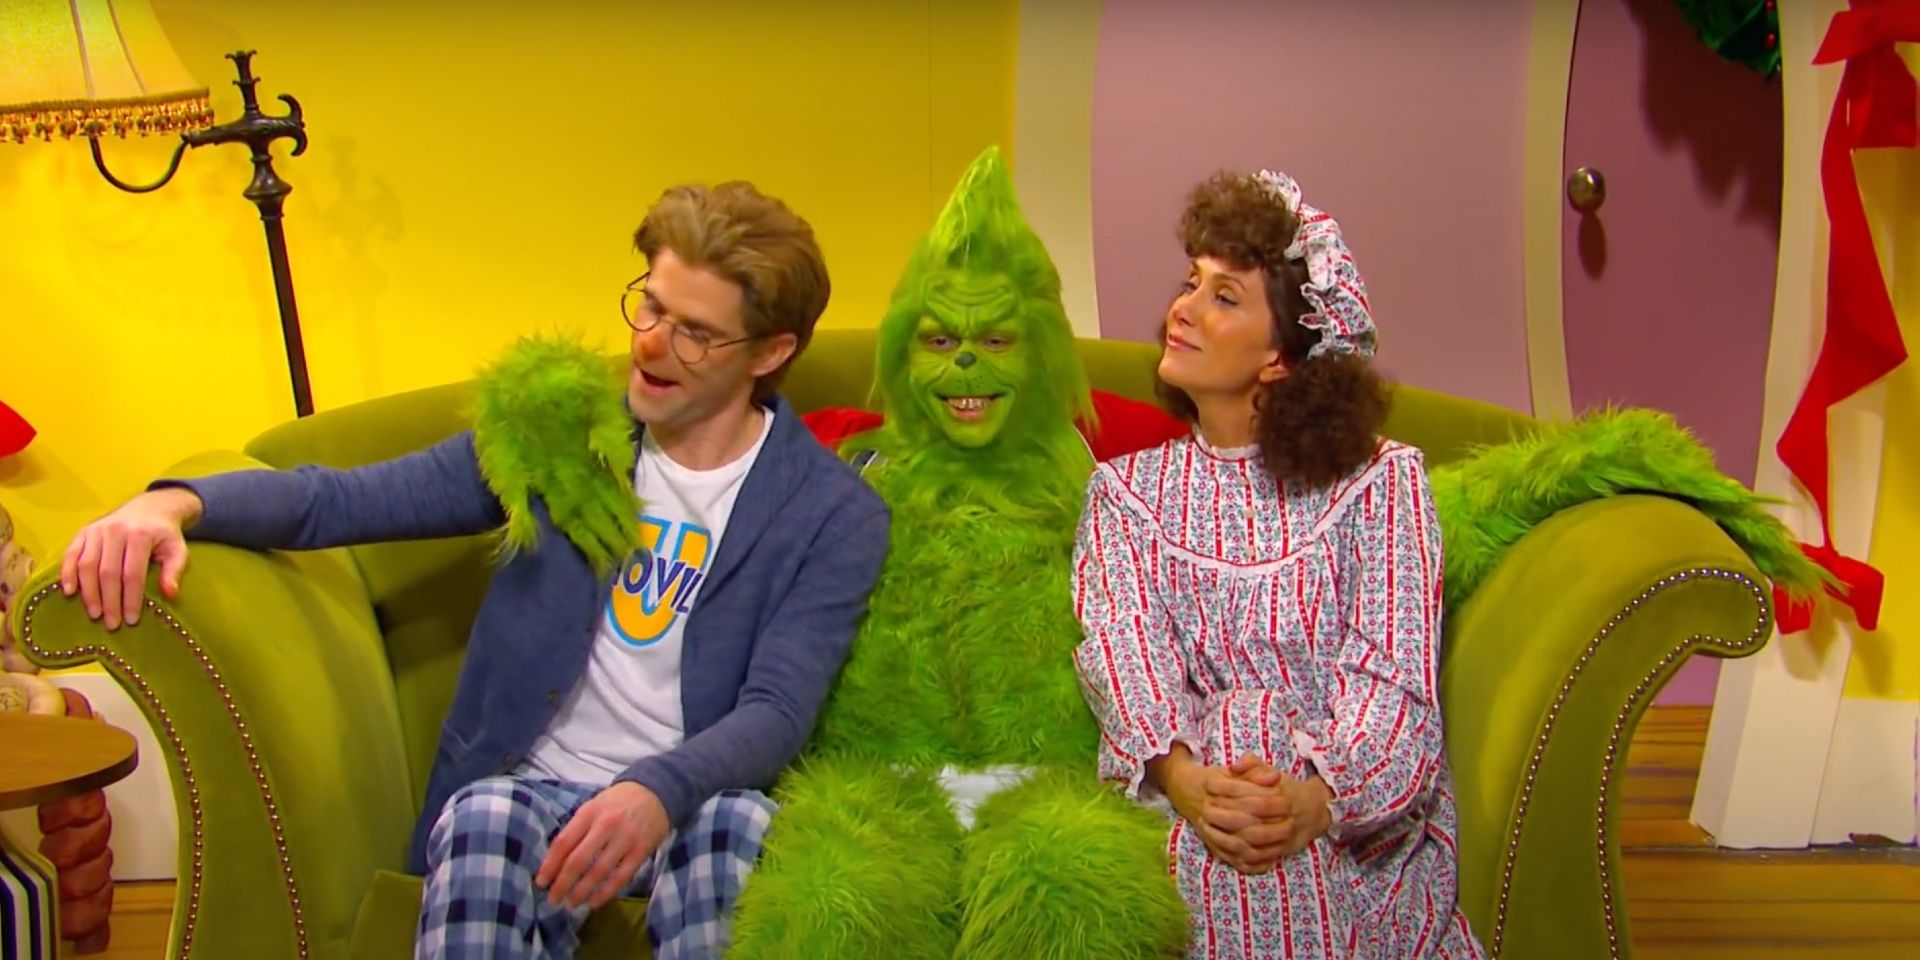 Mikey Day, Pete Davidson, and Kristen Wiig in Saturday Night Live Season 46